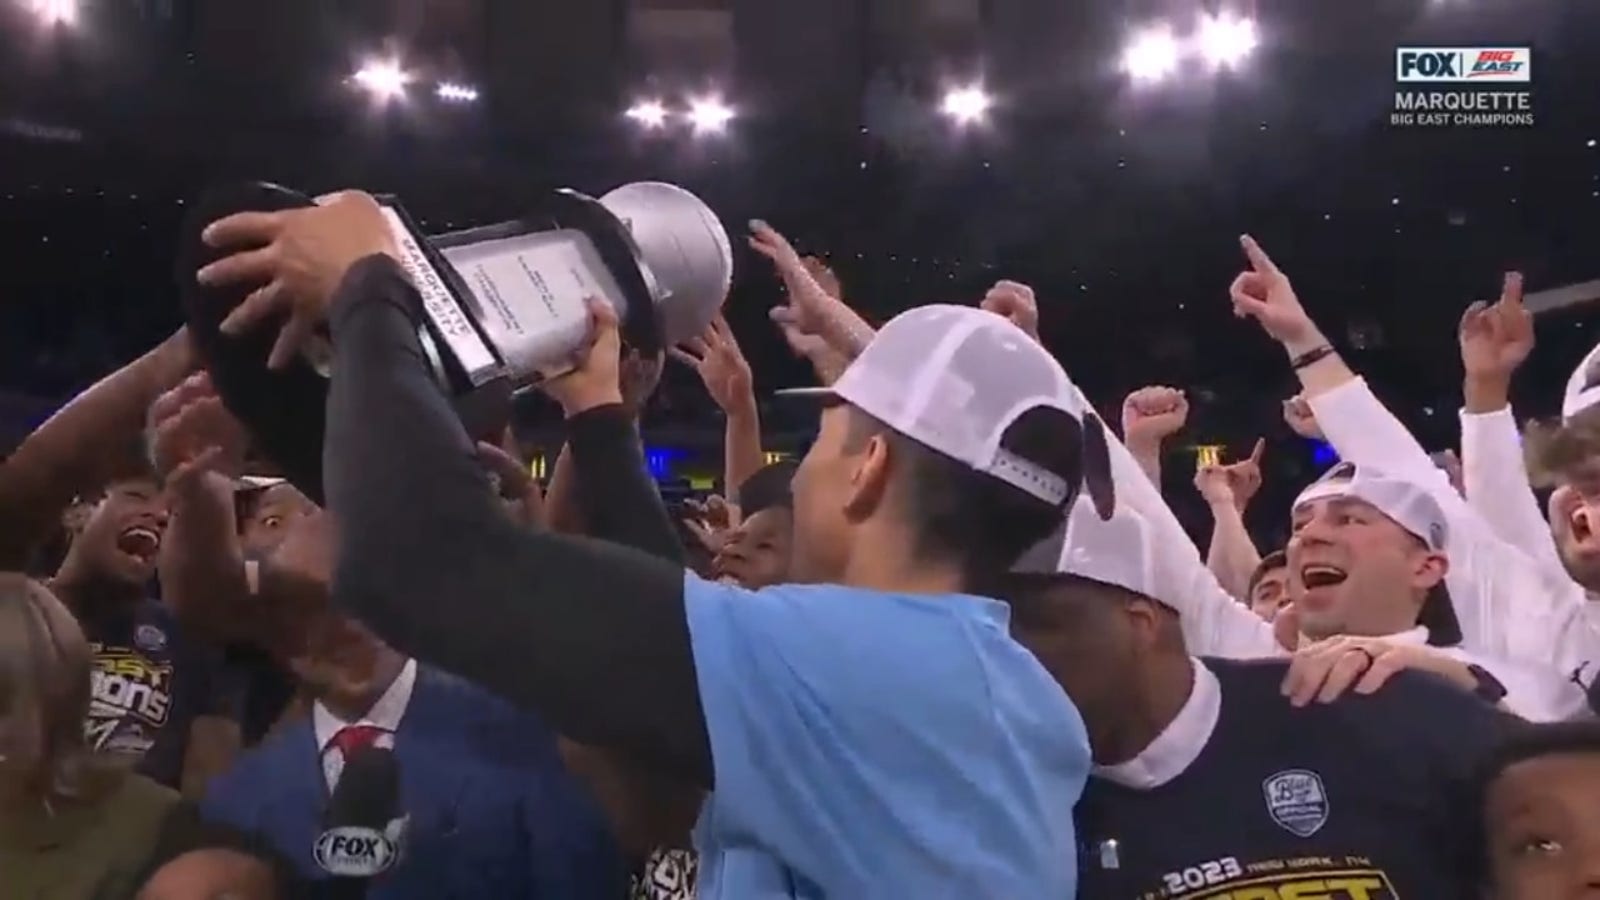 Marquette lifts the trophy